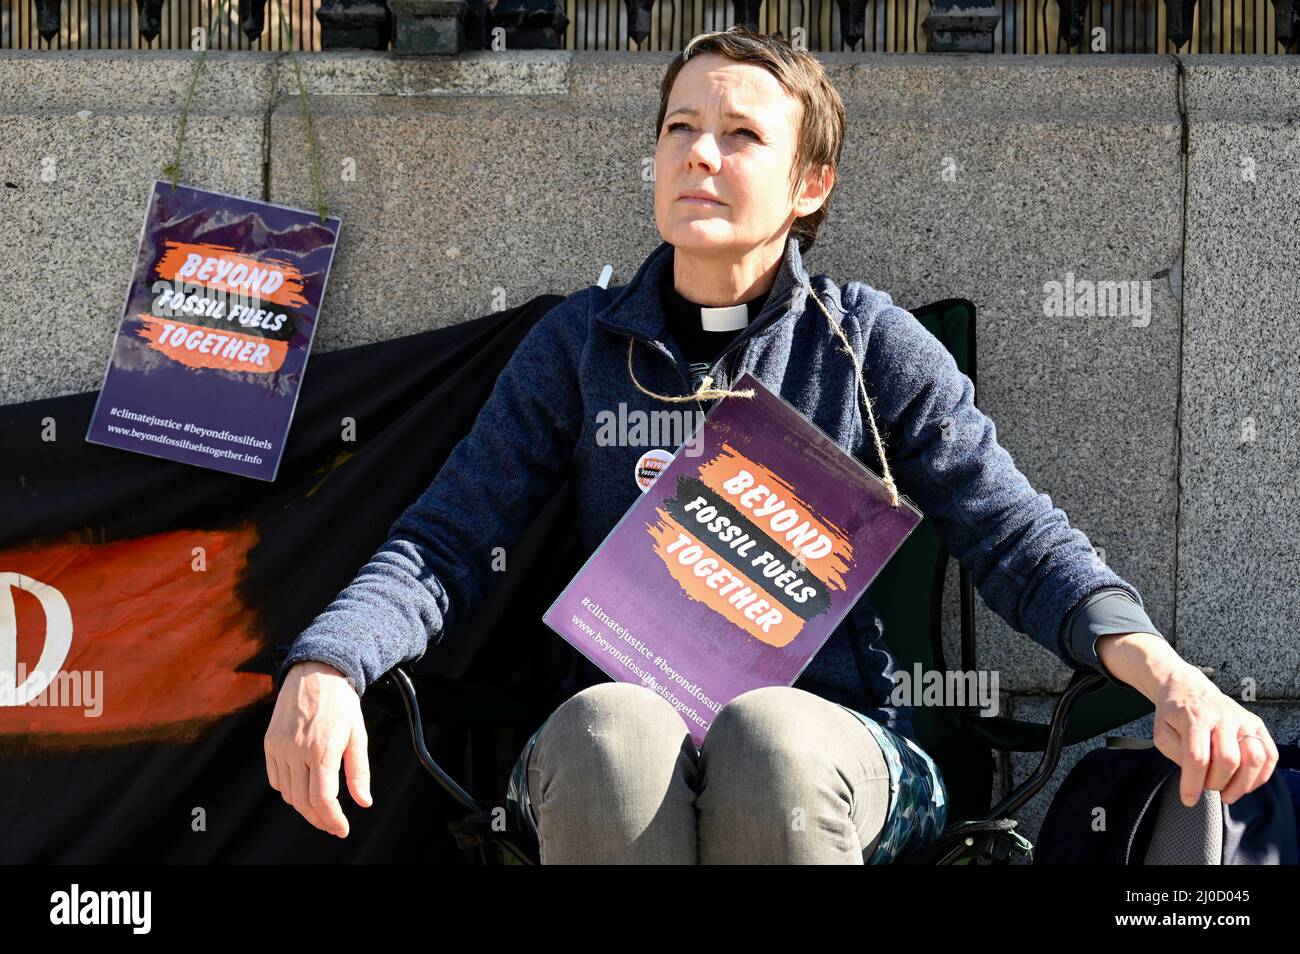 18th March 2022. London, UK. The Reverand Vanessa Aston joined Christian Climate Actions 'Beyond Fossil Fuels Together' vigil and fast outside the Houses of Parliament, Parliament Square, Westminster. Credit: michael melia/Alamy Live News Stock Photo